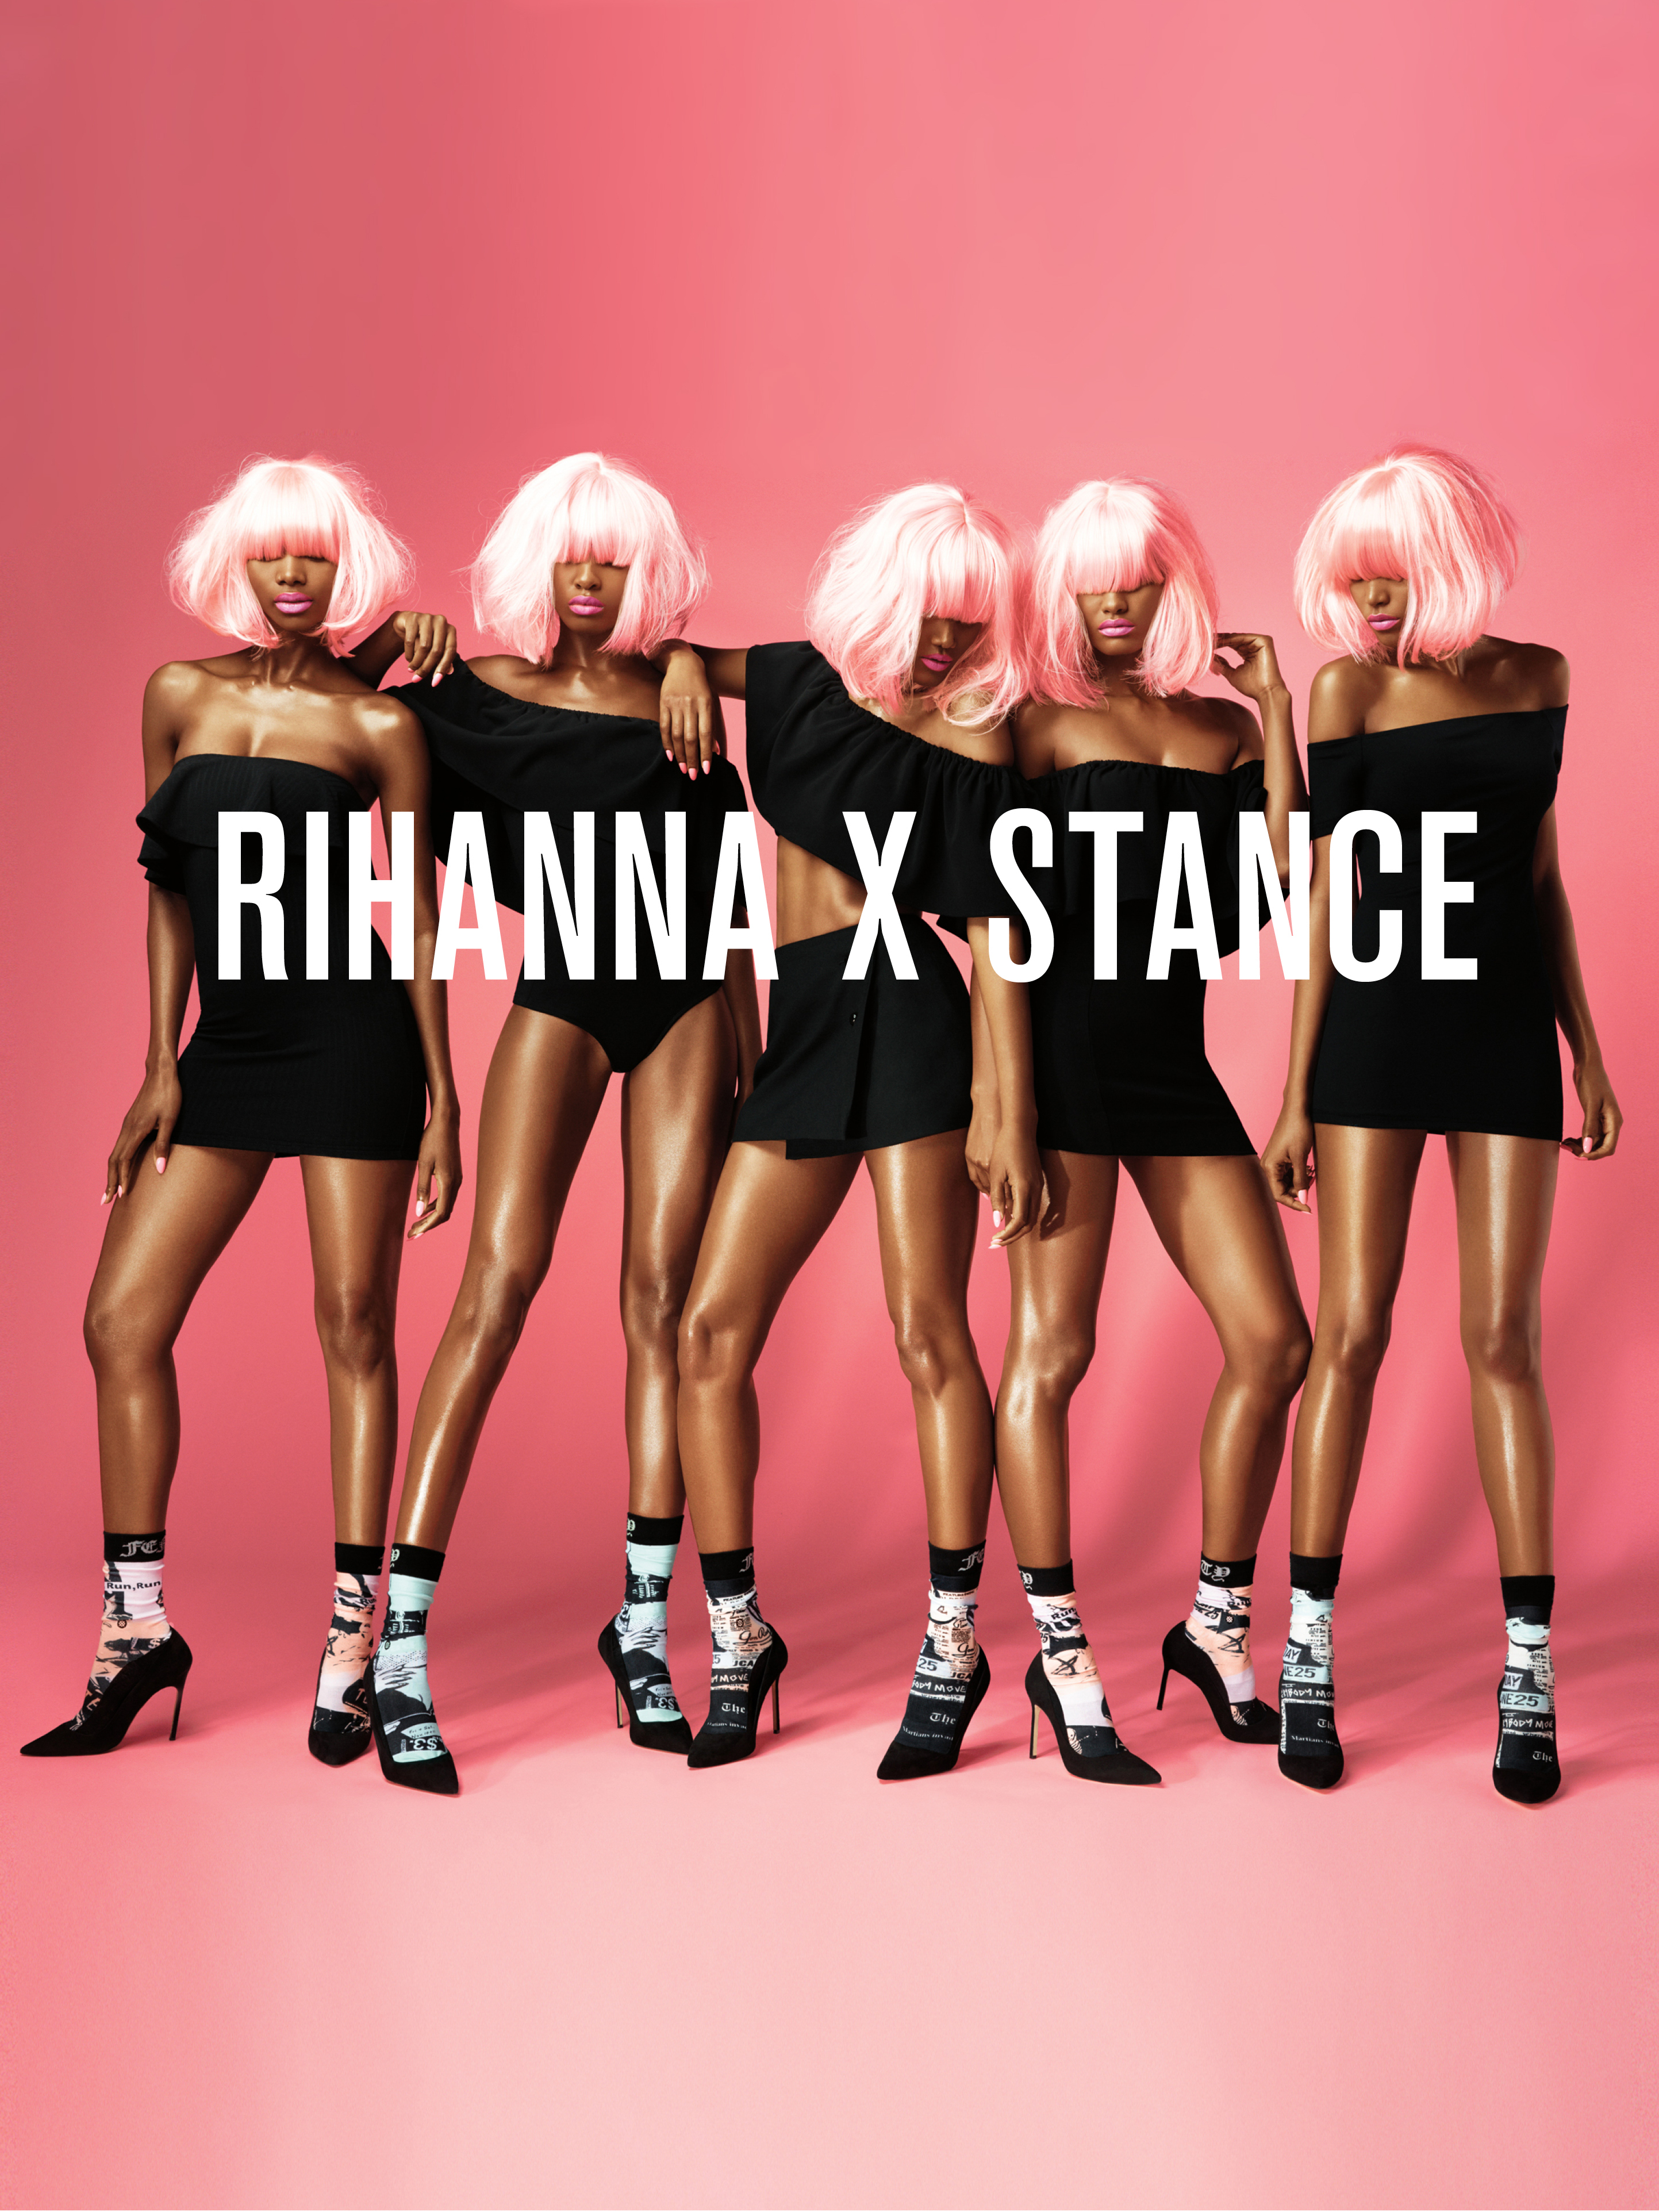 15_RihXStance-campaign-vertical-branded3